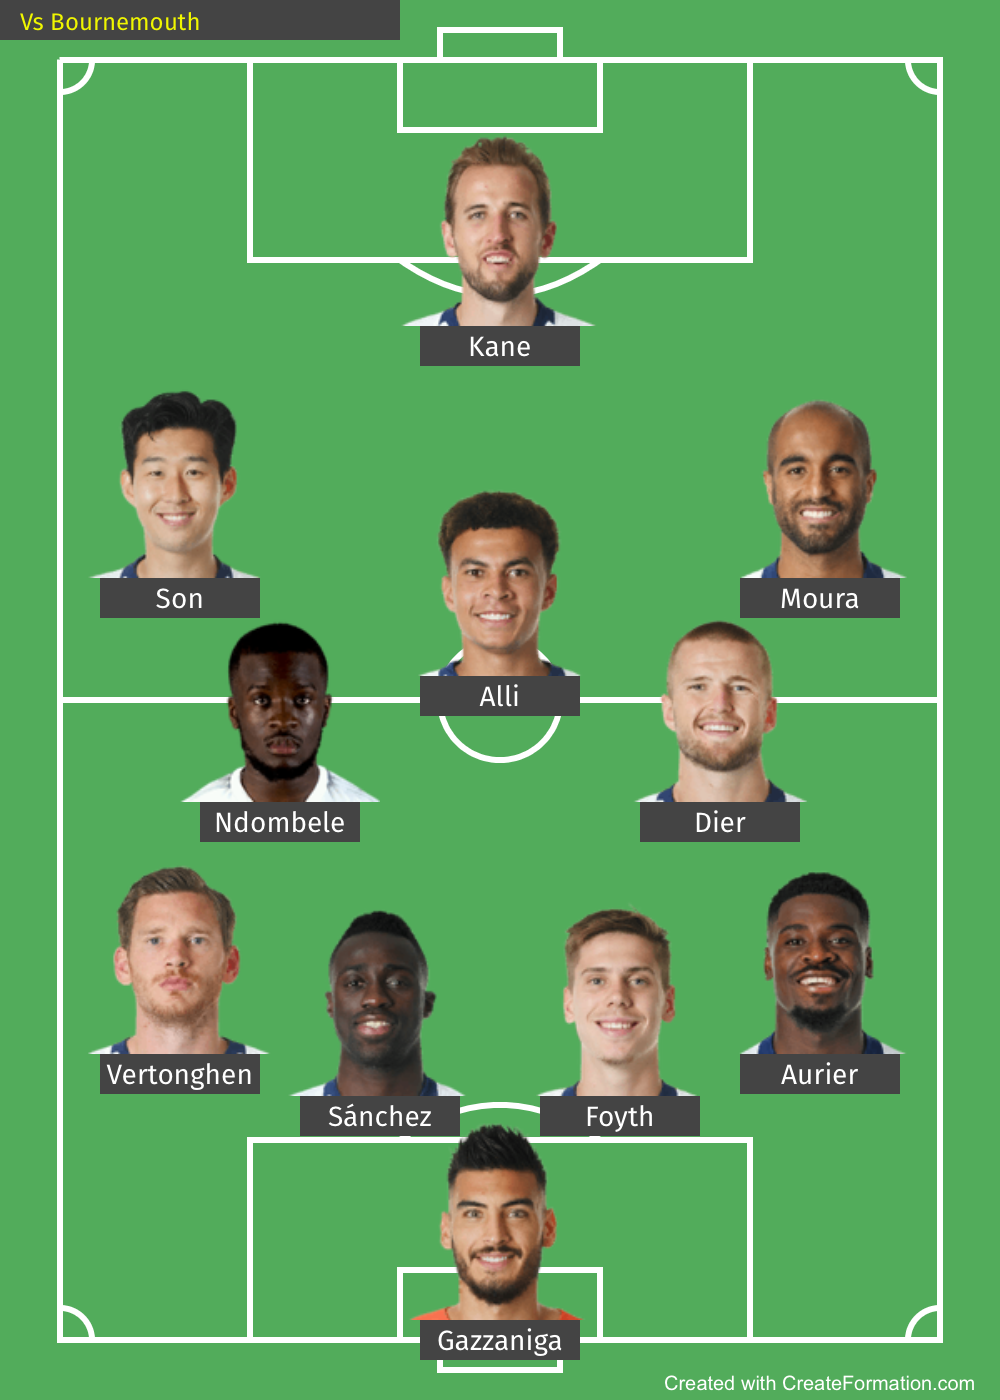 Vs Bournemouth.png